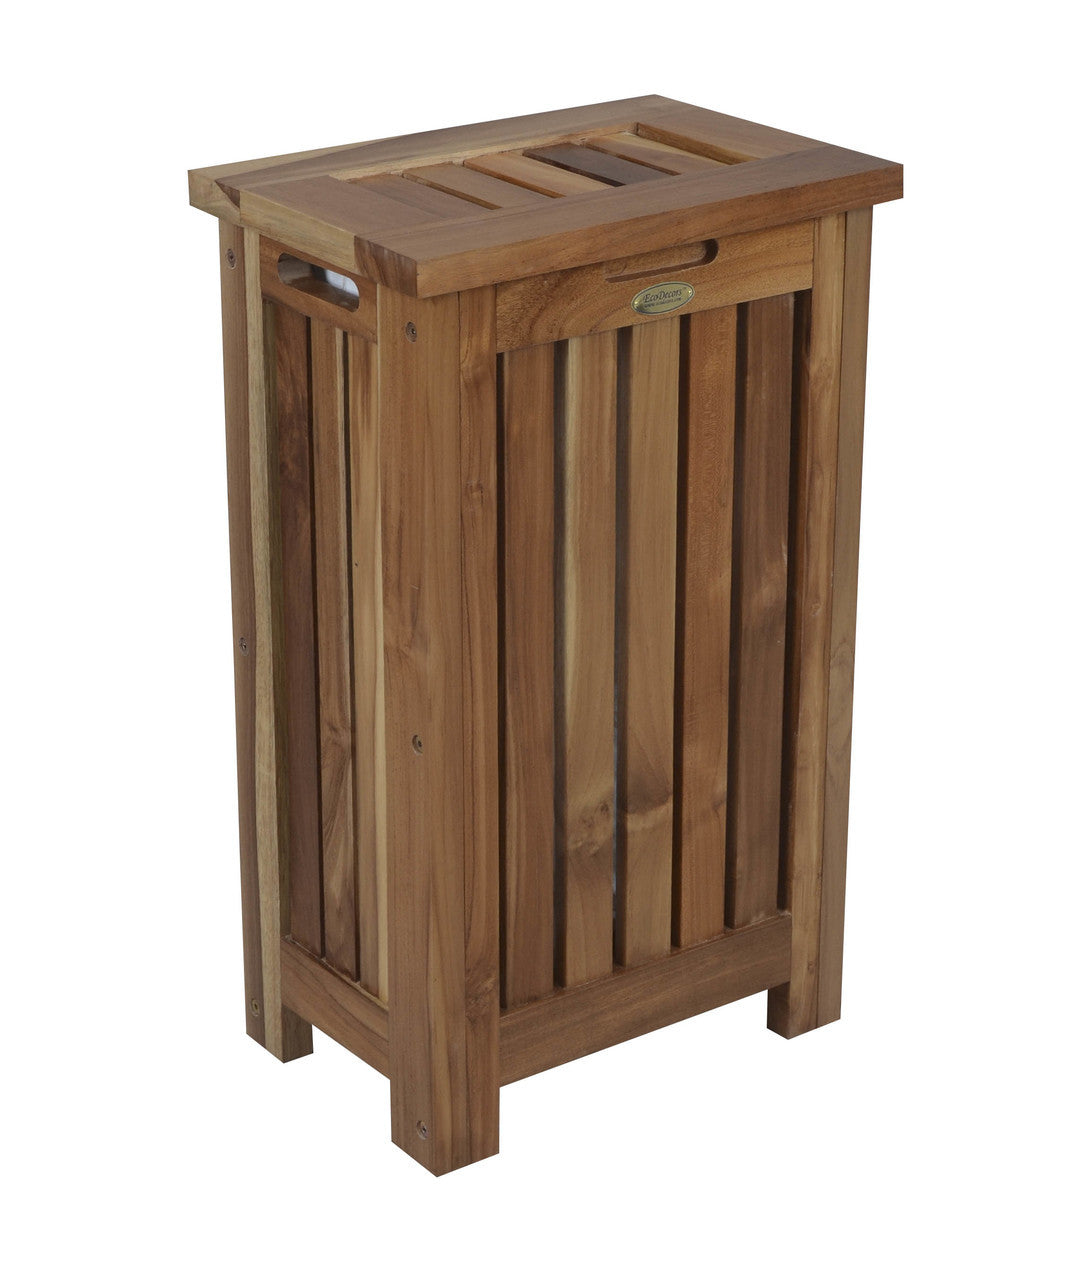 EcoDecors® Eleganto® 24"Teak Wood Compact Double Laundry Storage Hamper with Removable Bags in EarthyTeak Finish